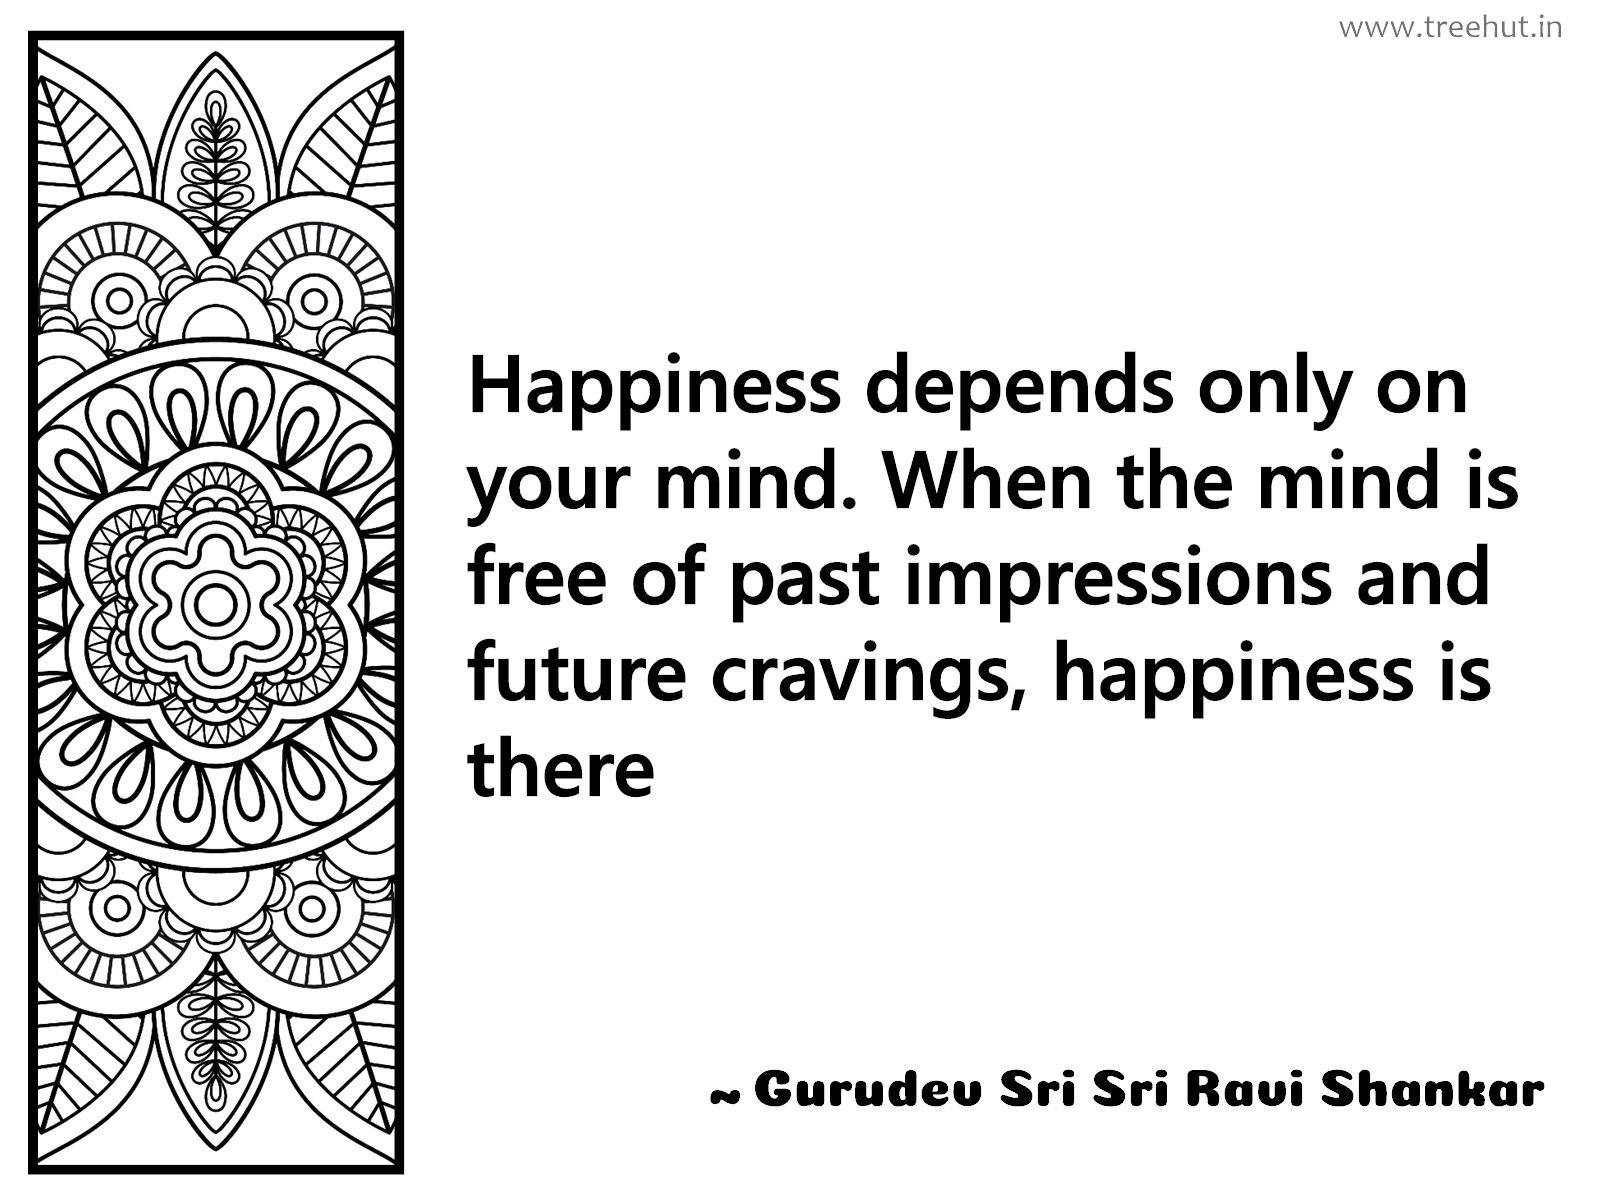 Happiness depends only on your mind. When the mind is free of past impressions and future cravings, happiness is there Inspirational Quote by Gurudev Sri Sri Ravi Shankar, coloring pages